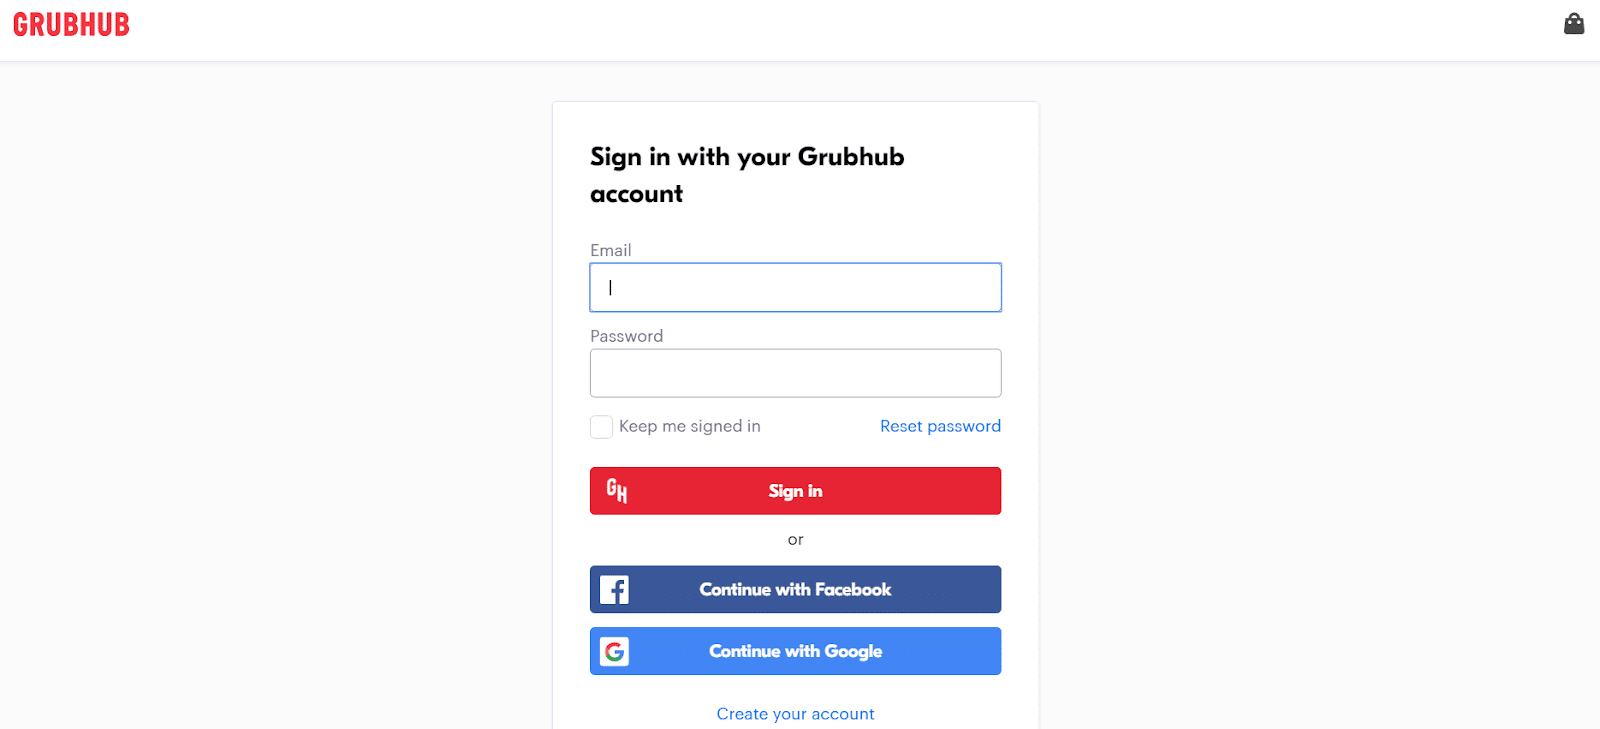 How does Grubhub work: the Grubhub sign in page